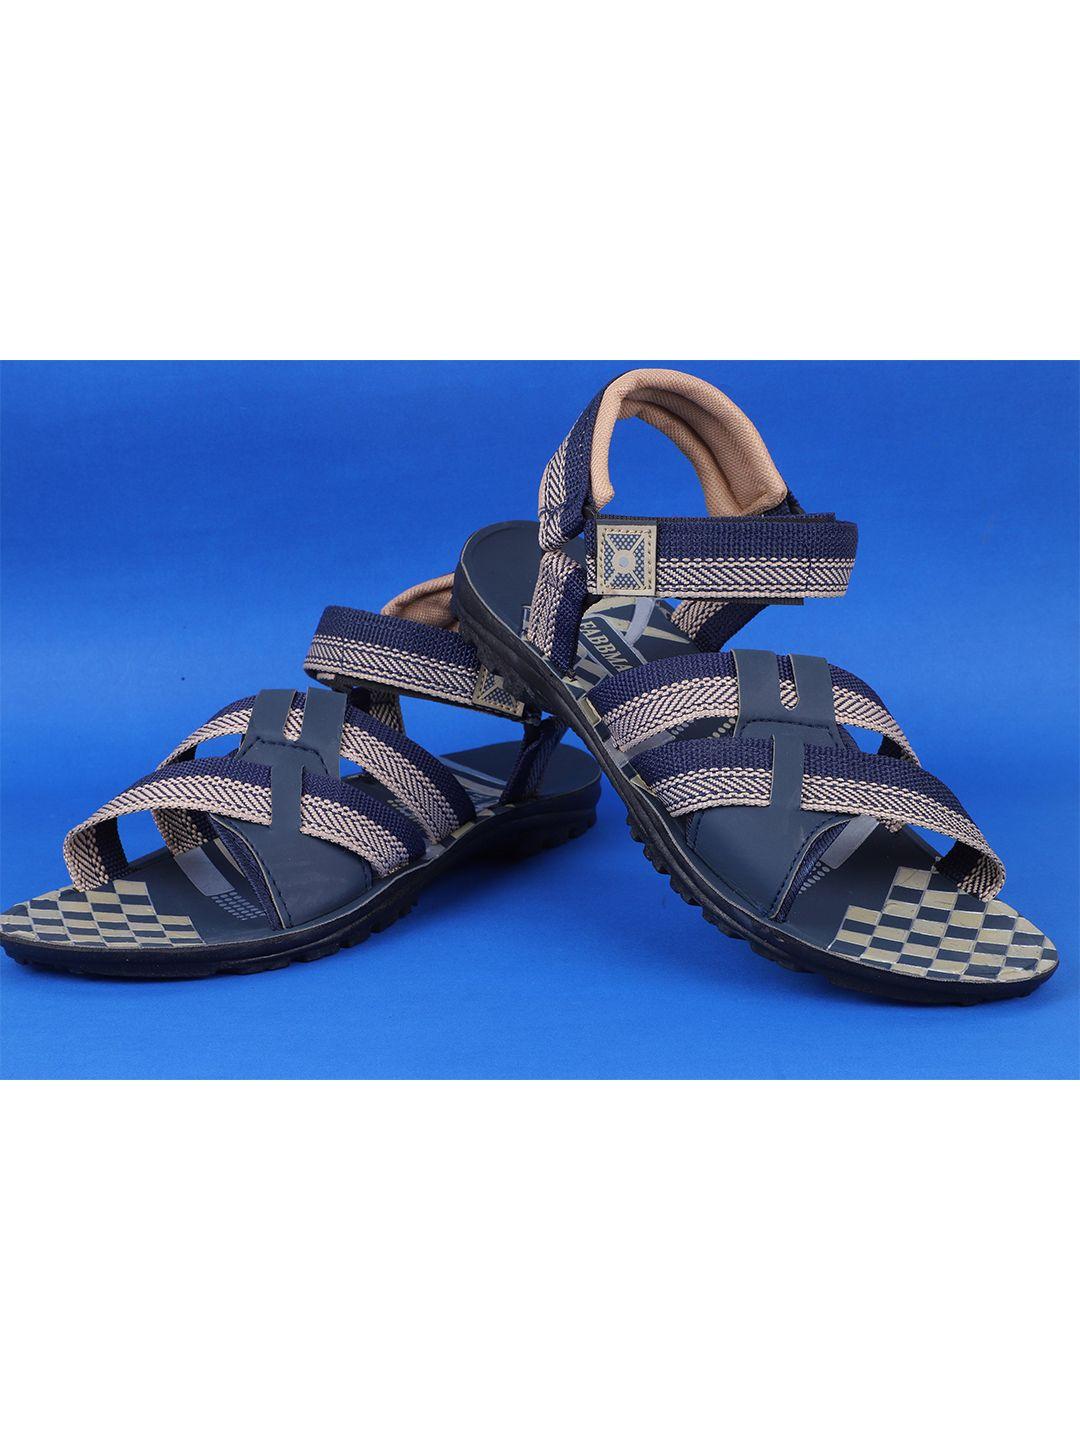 fabbmate-men-synthetic-sports-sandals